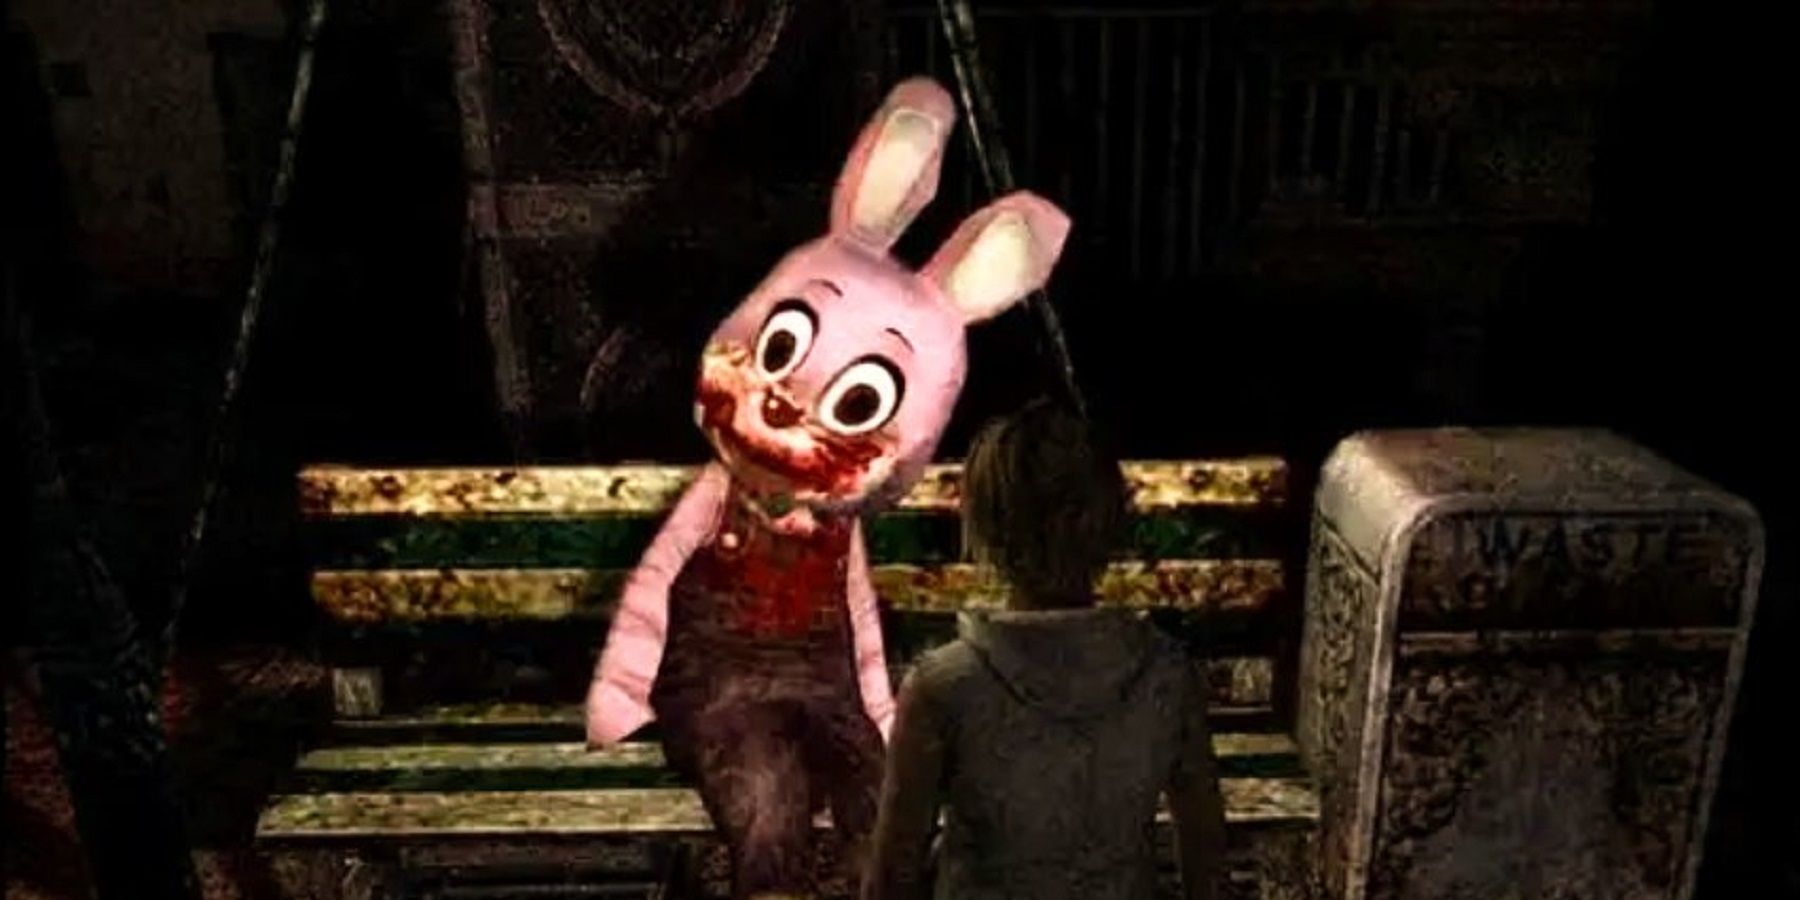 silent hill 3 robbie the rabbit with heather mason